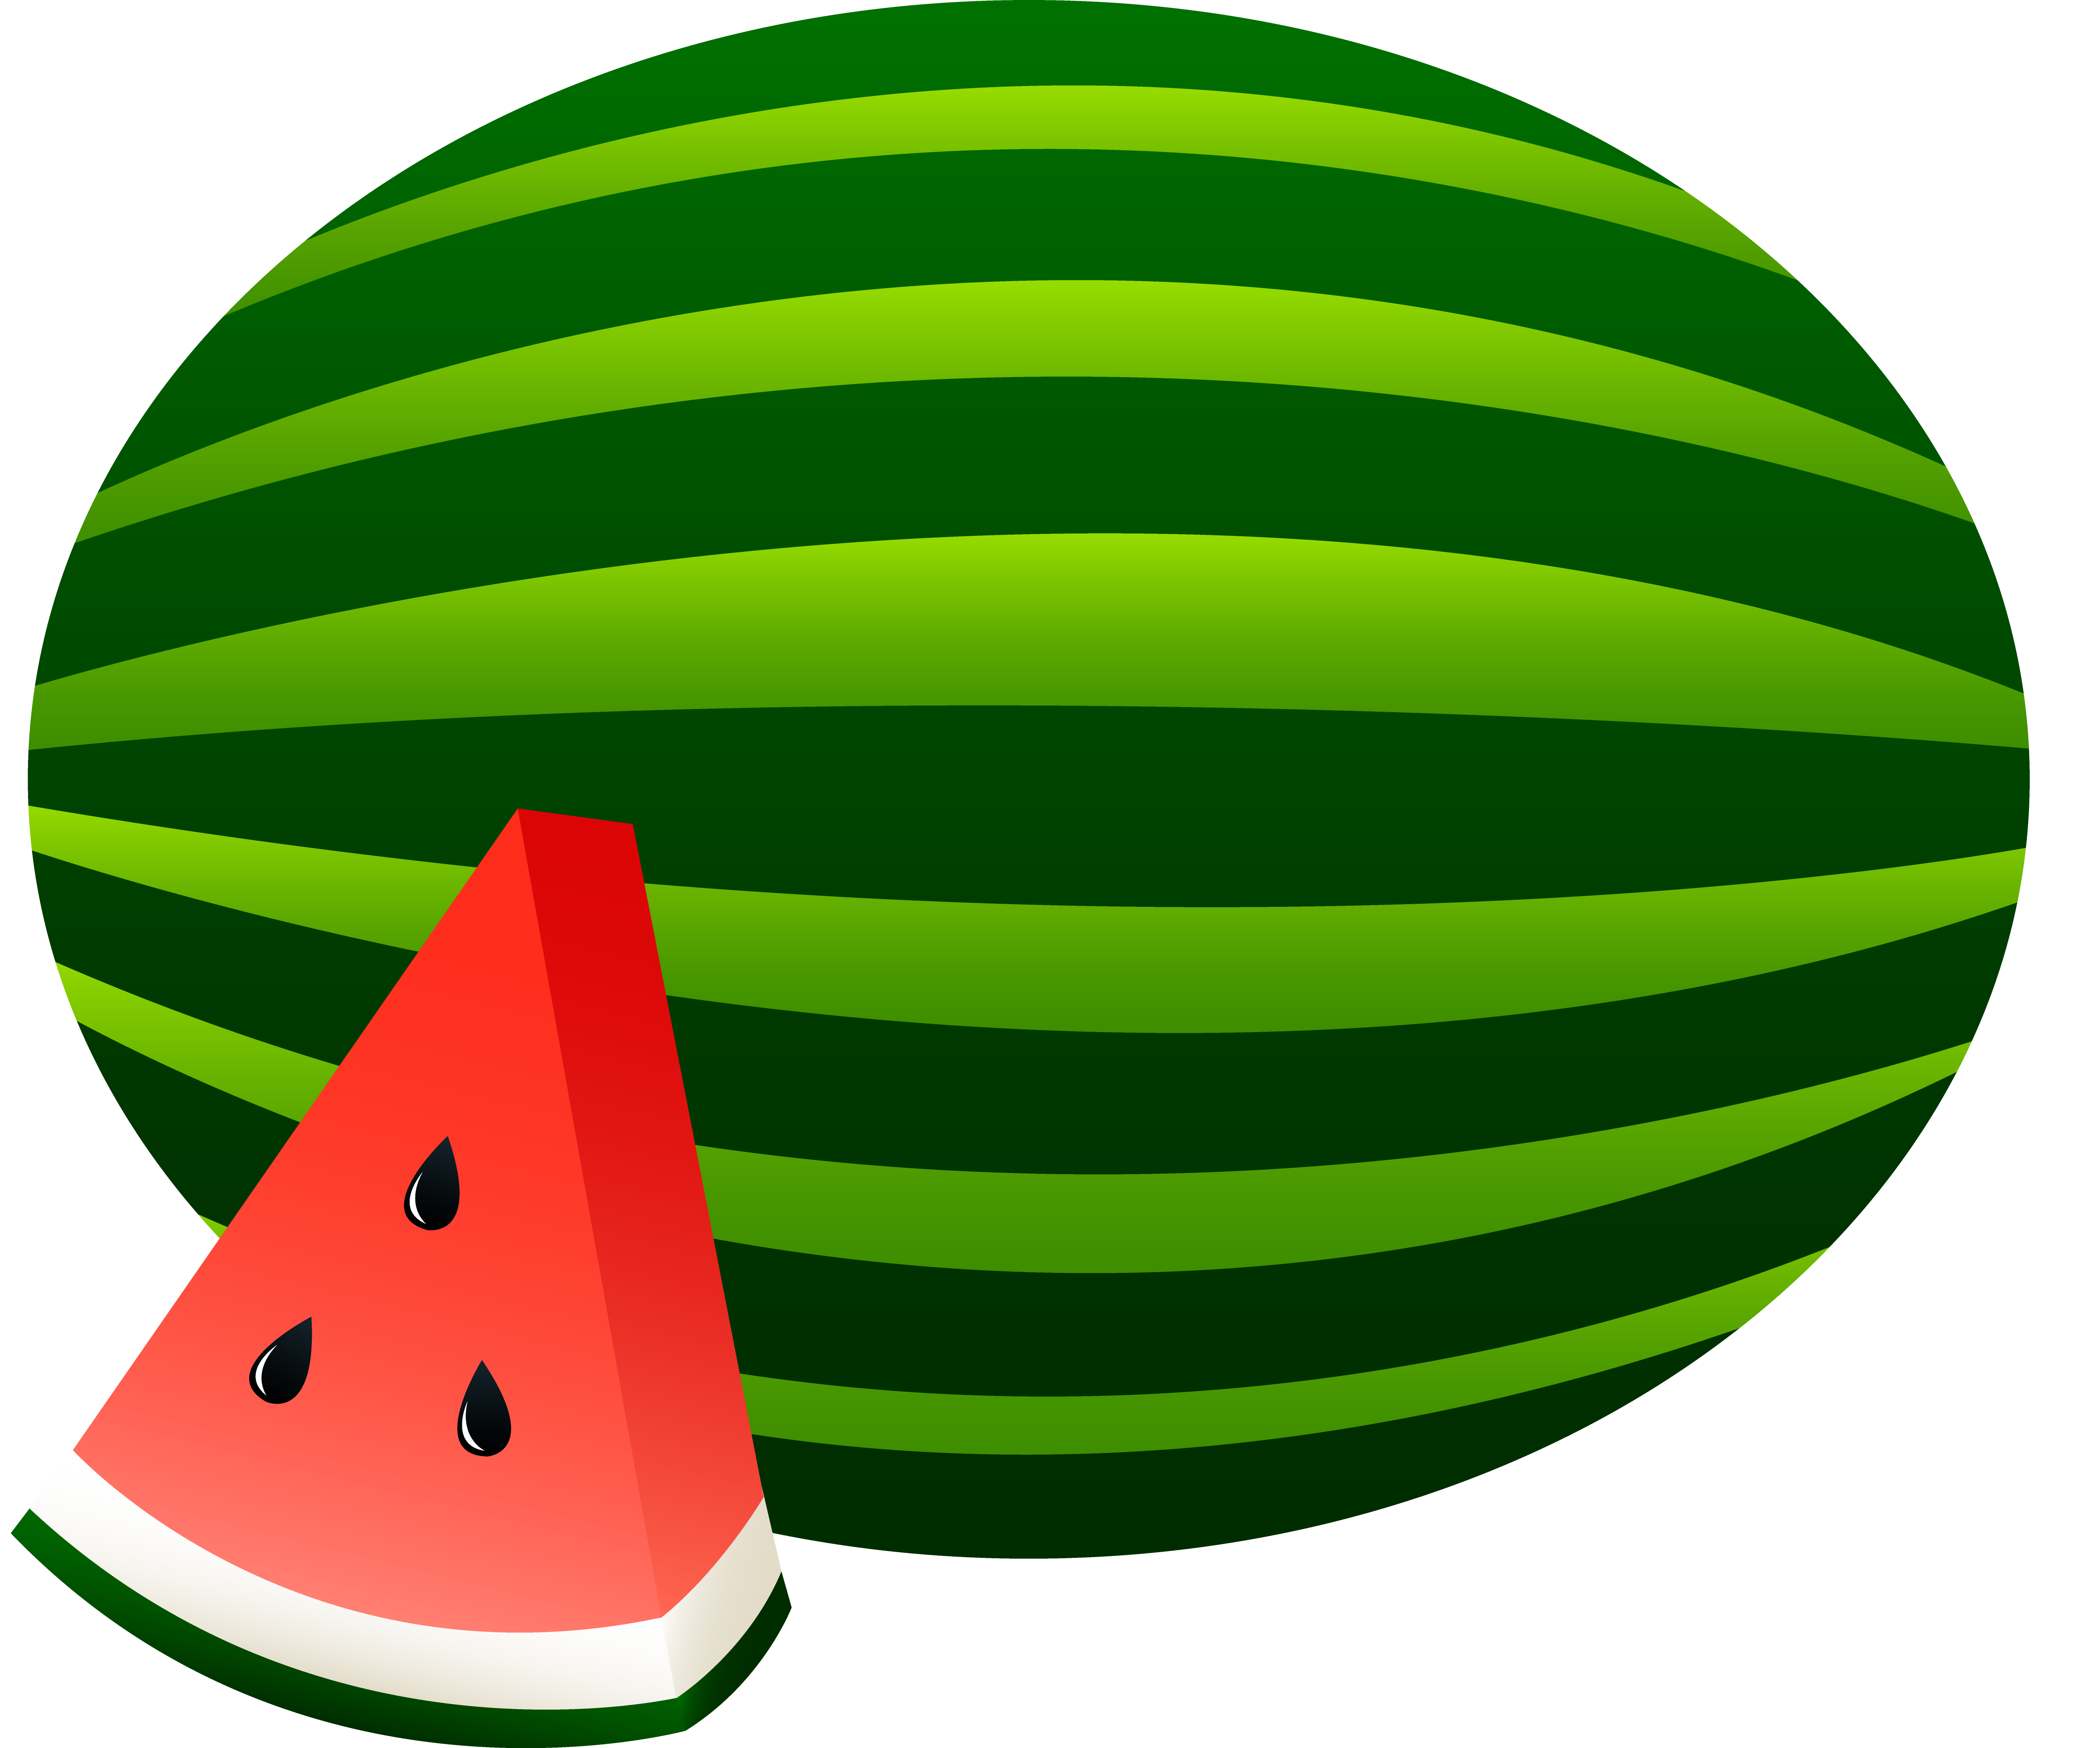 Whole and slice free. Watermelon clipart honeydew